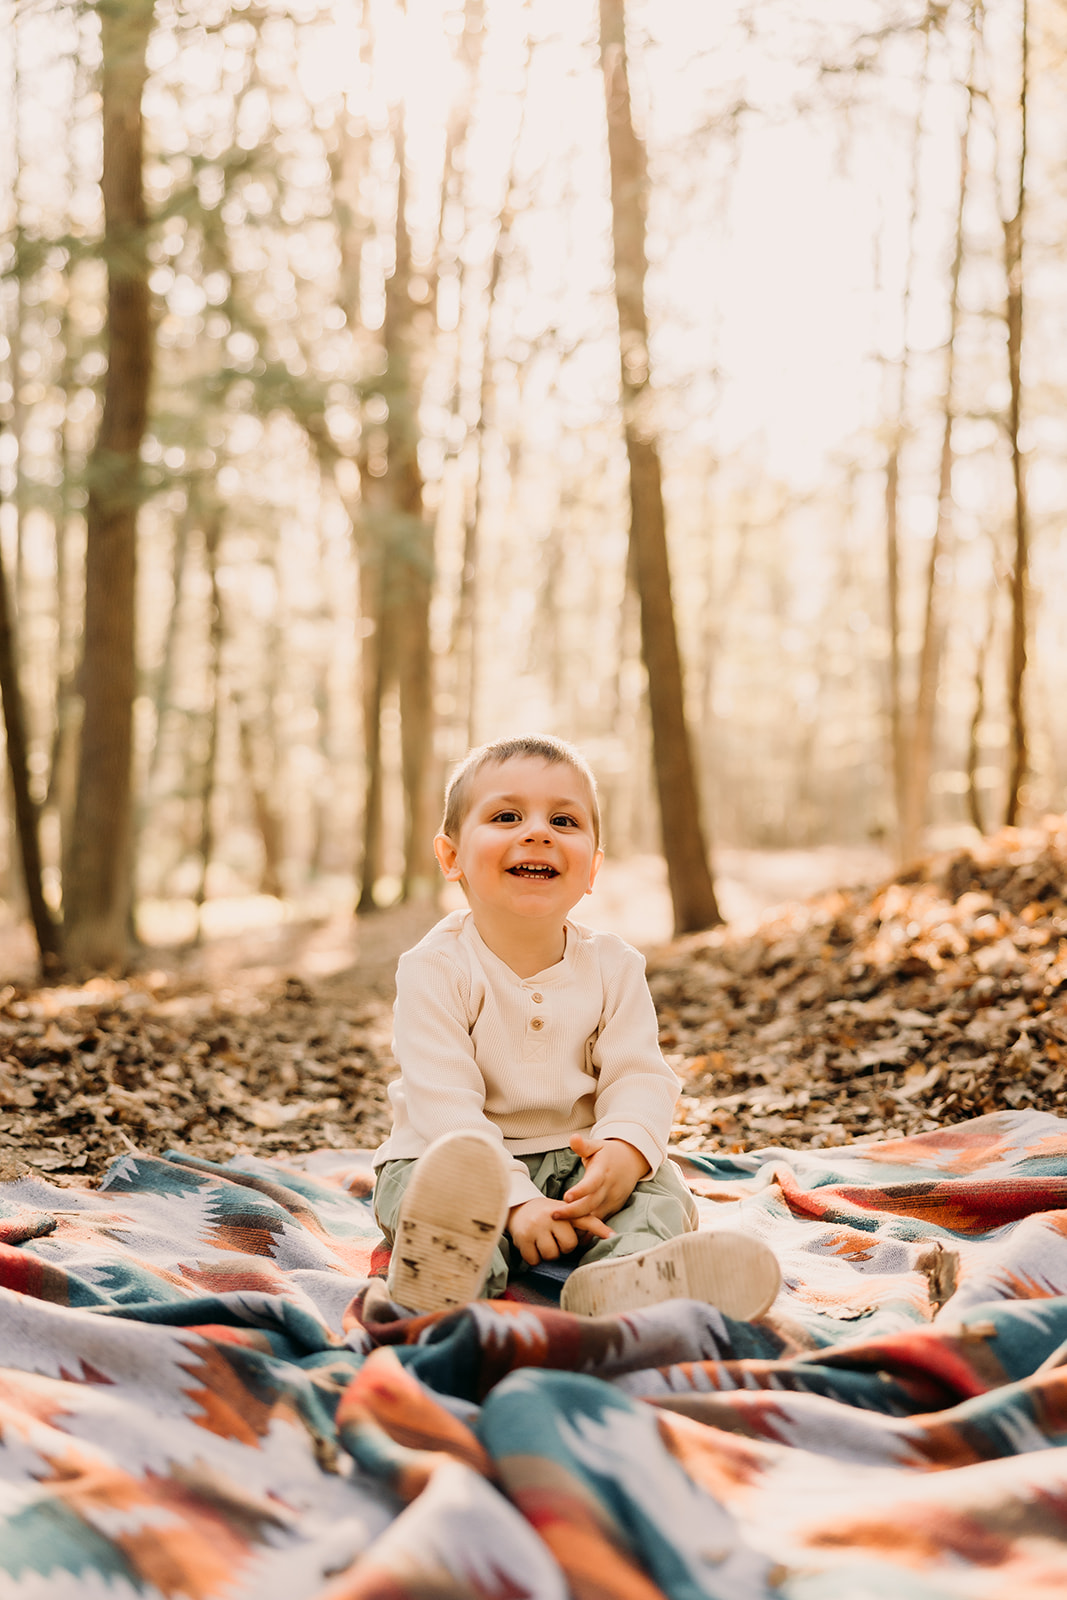 Wholesome fun and laughter in a child's outdoor photoshoot